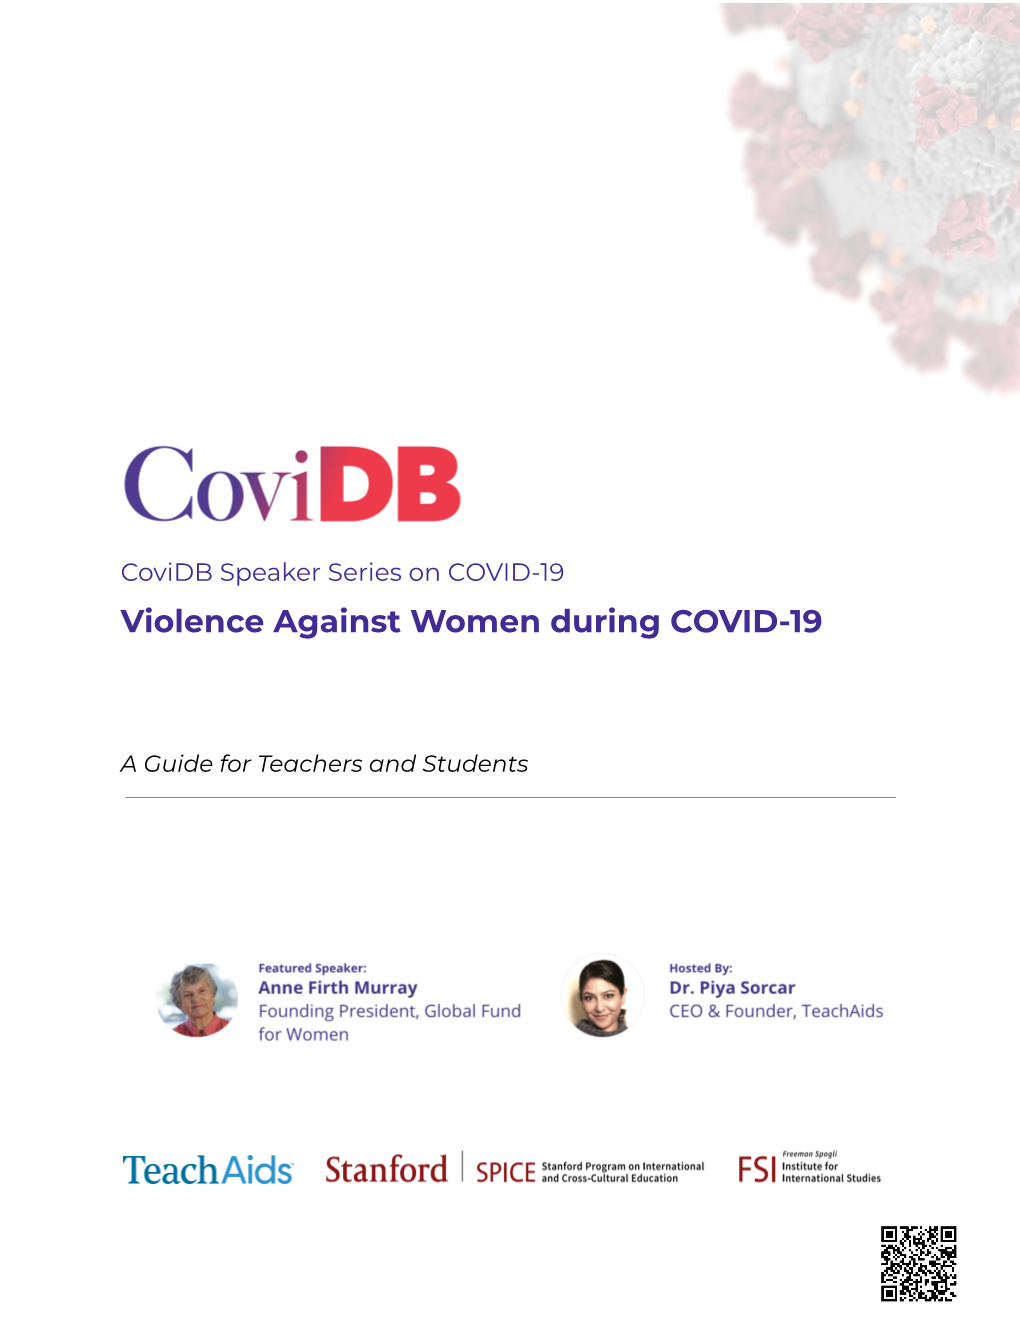 Violence Against Women During COVID-19